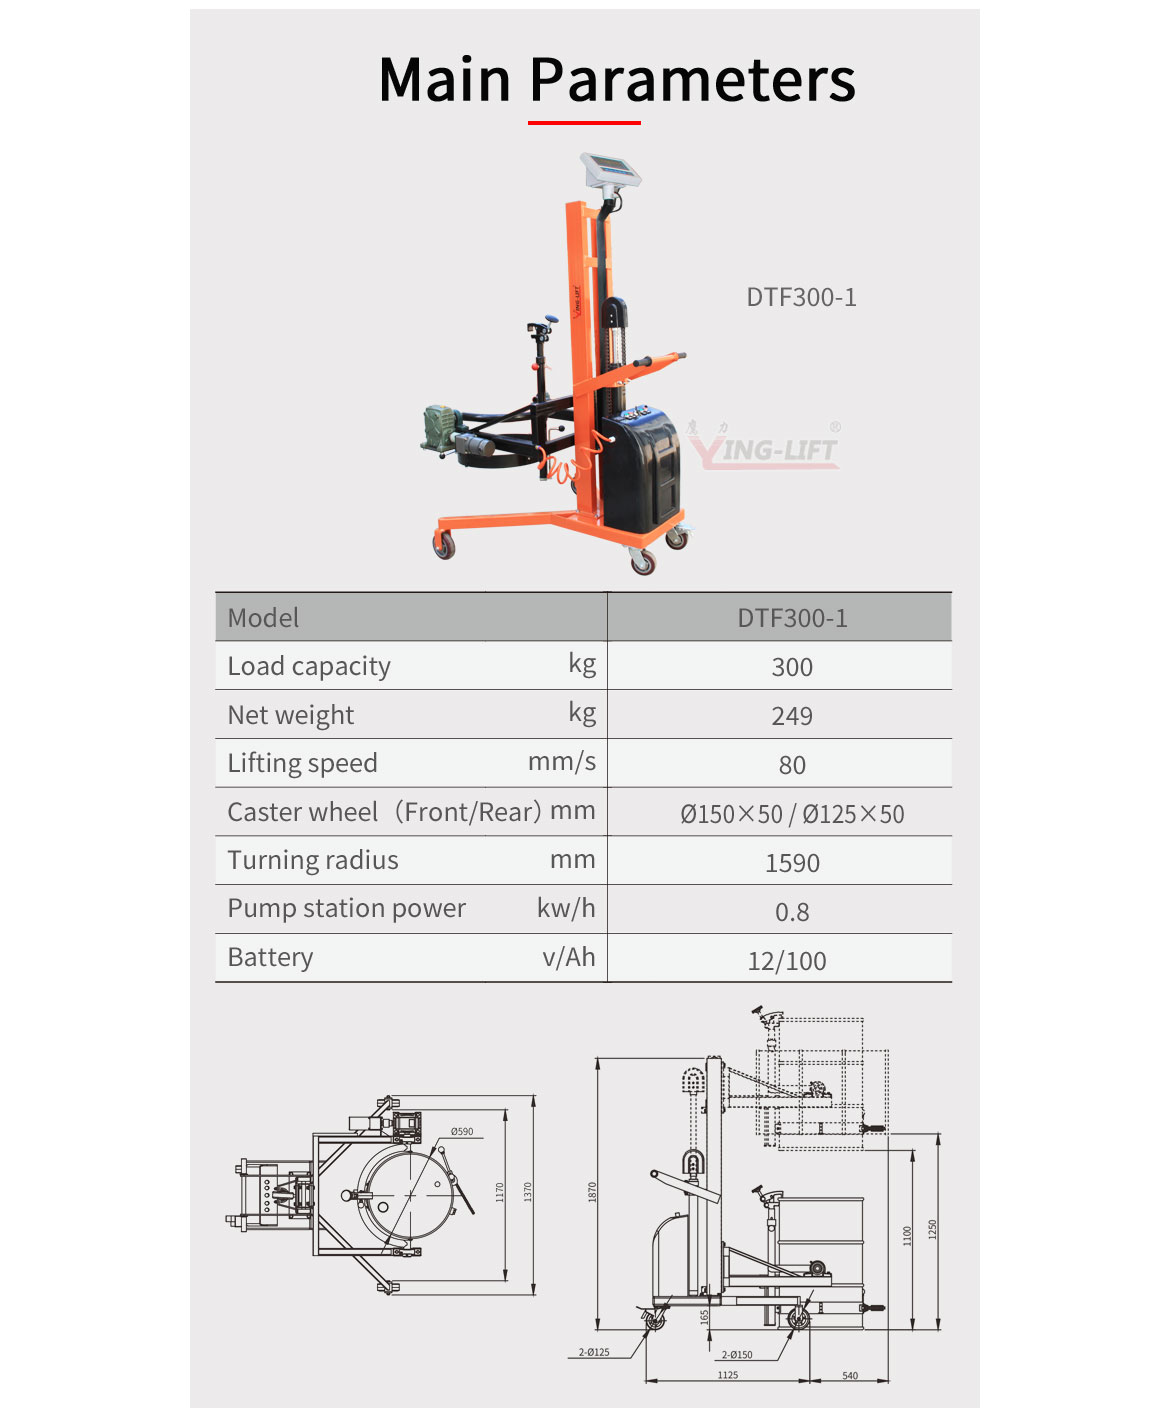 Electric Hydraulic Lifting and Lowering V-Shaped Drum Lift